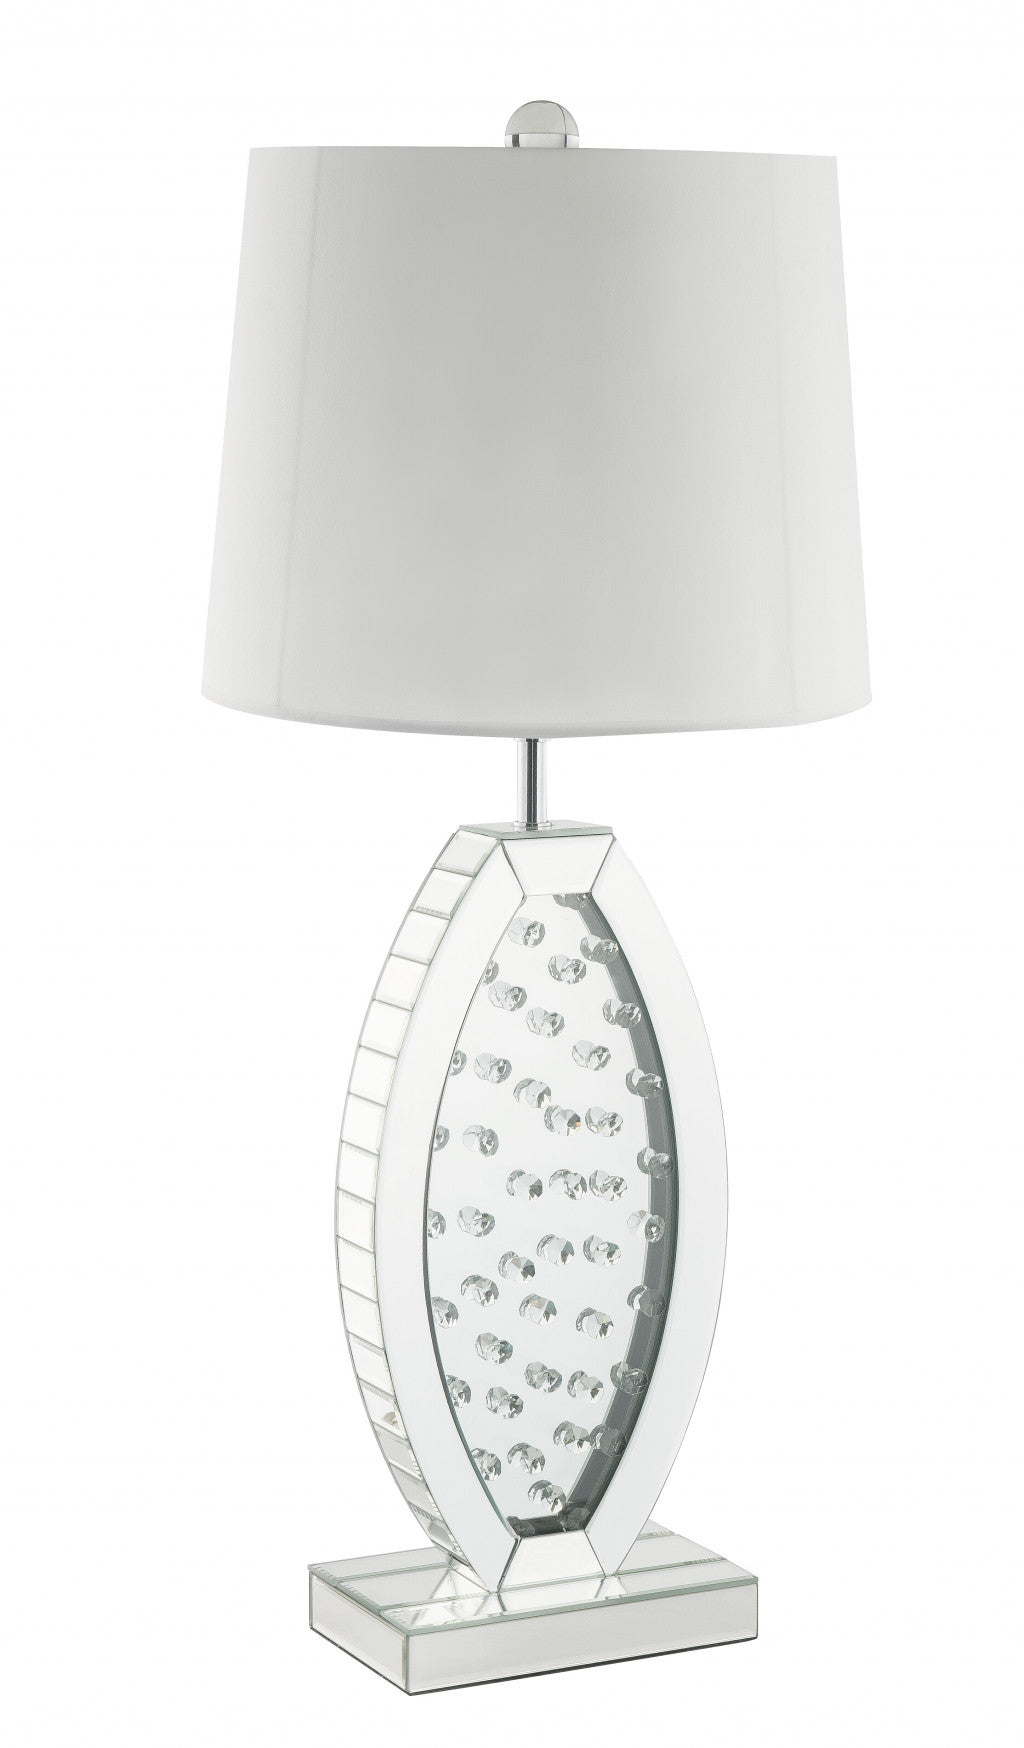 37" Mirrored Glass Table Lamp With White Drum Shade